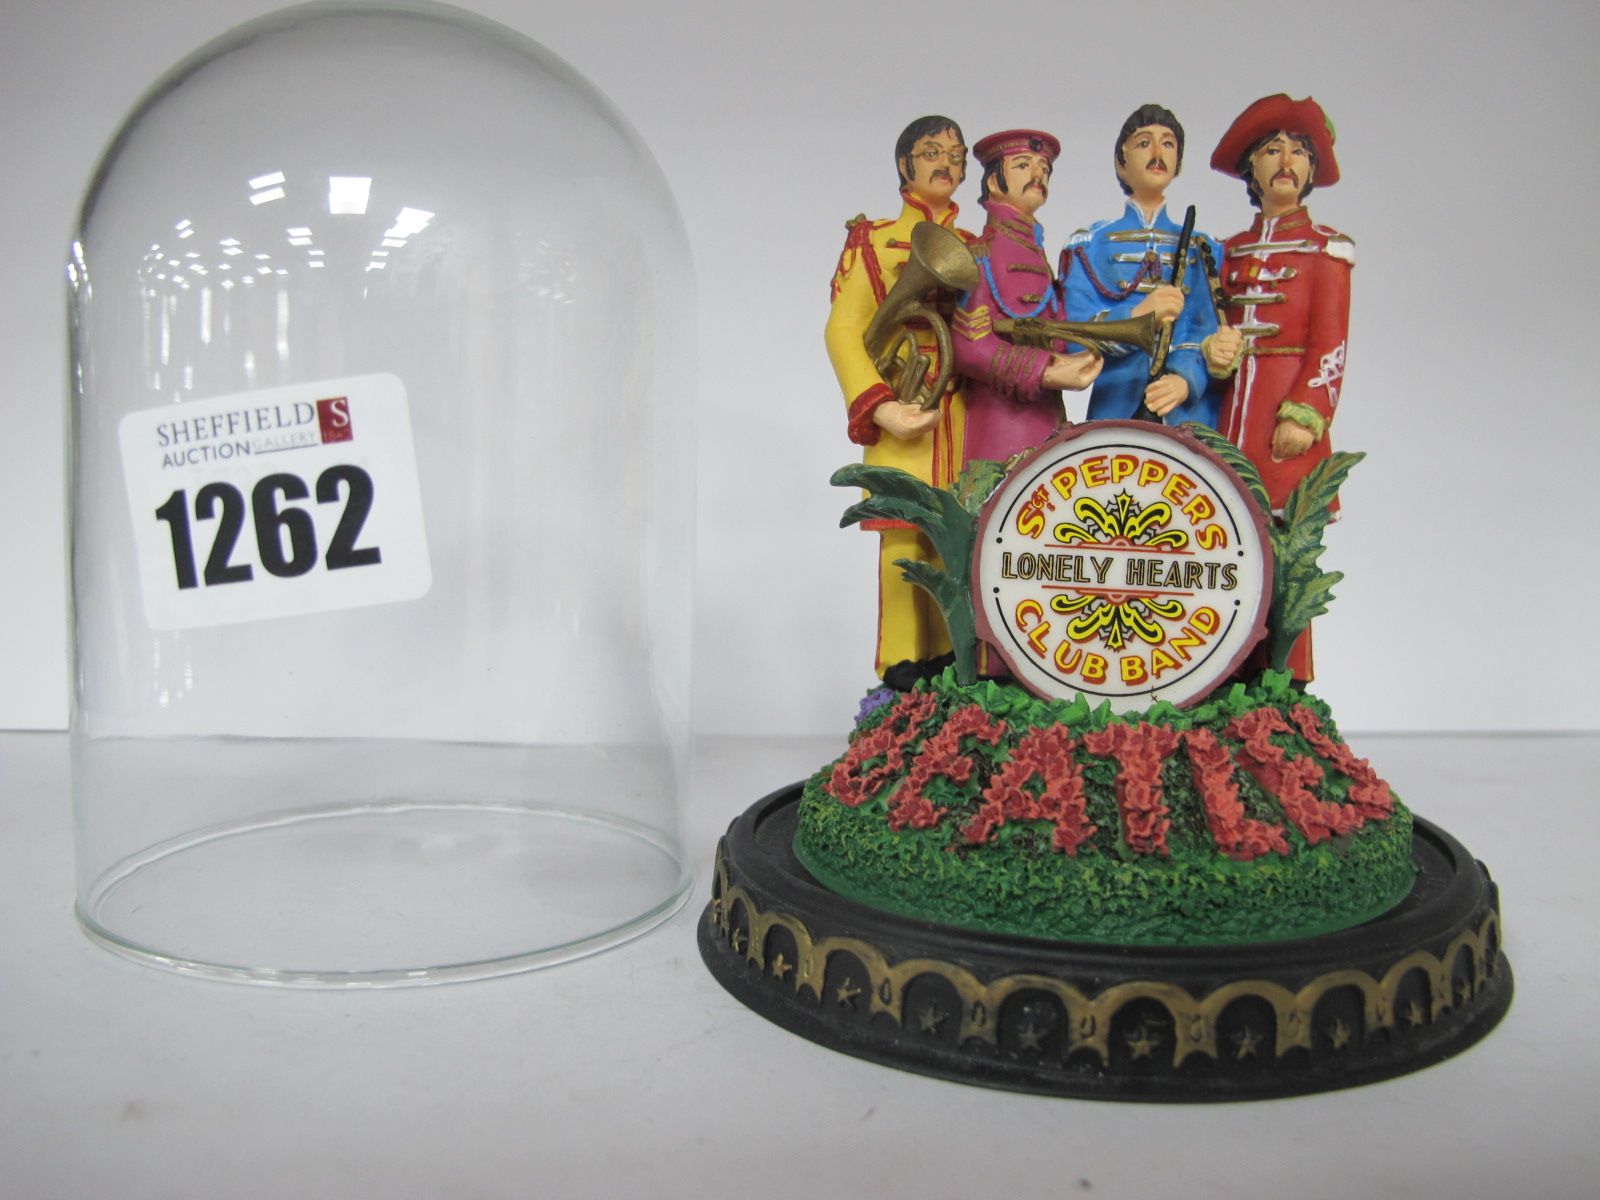 The Beatles Franklin Mint 'Sgt Peppers Lonely Hearts Club Band' Model, under glass dome 11cm high